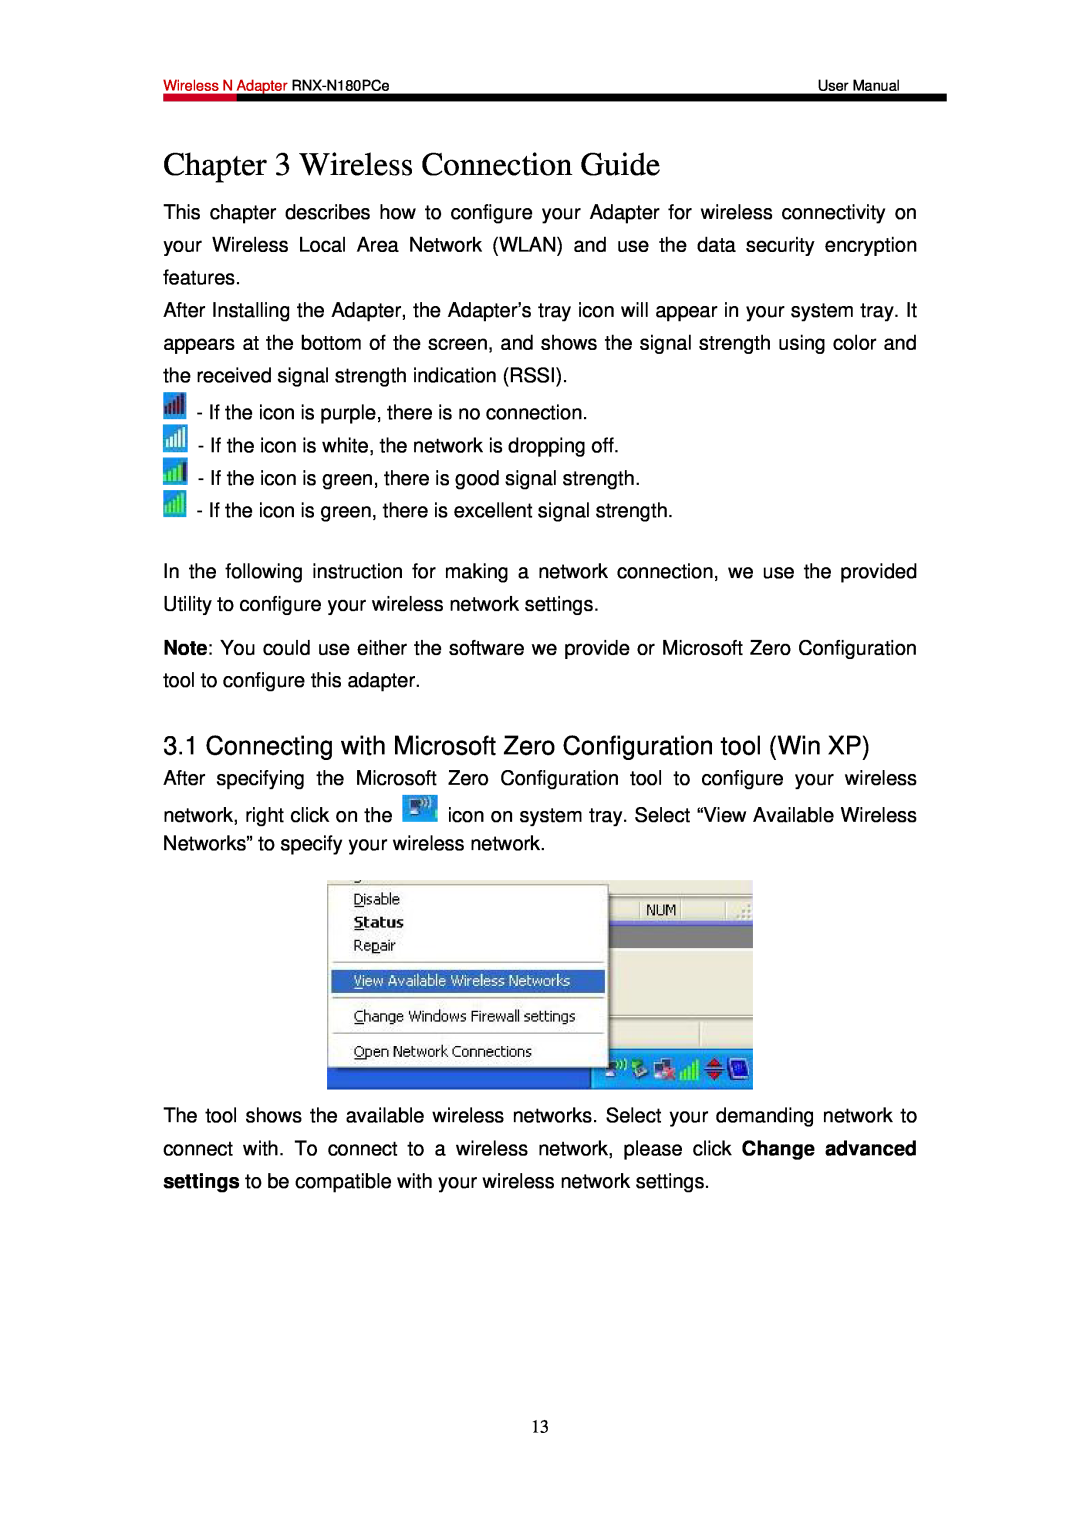 Rosewill RNX-N180PCE user manual Connecting with Microsoft Zero Configuration tool Win XP, Wireless Connection Guide 